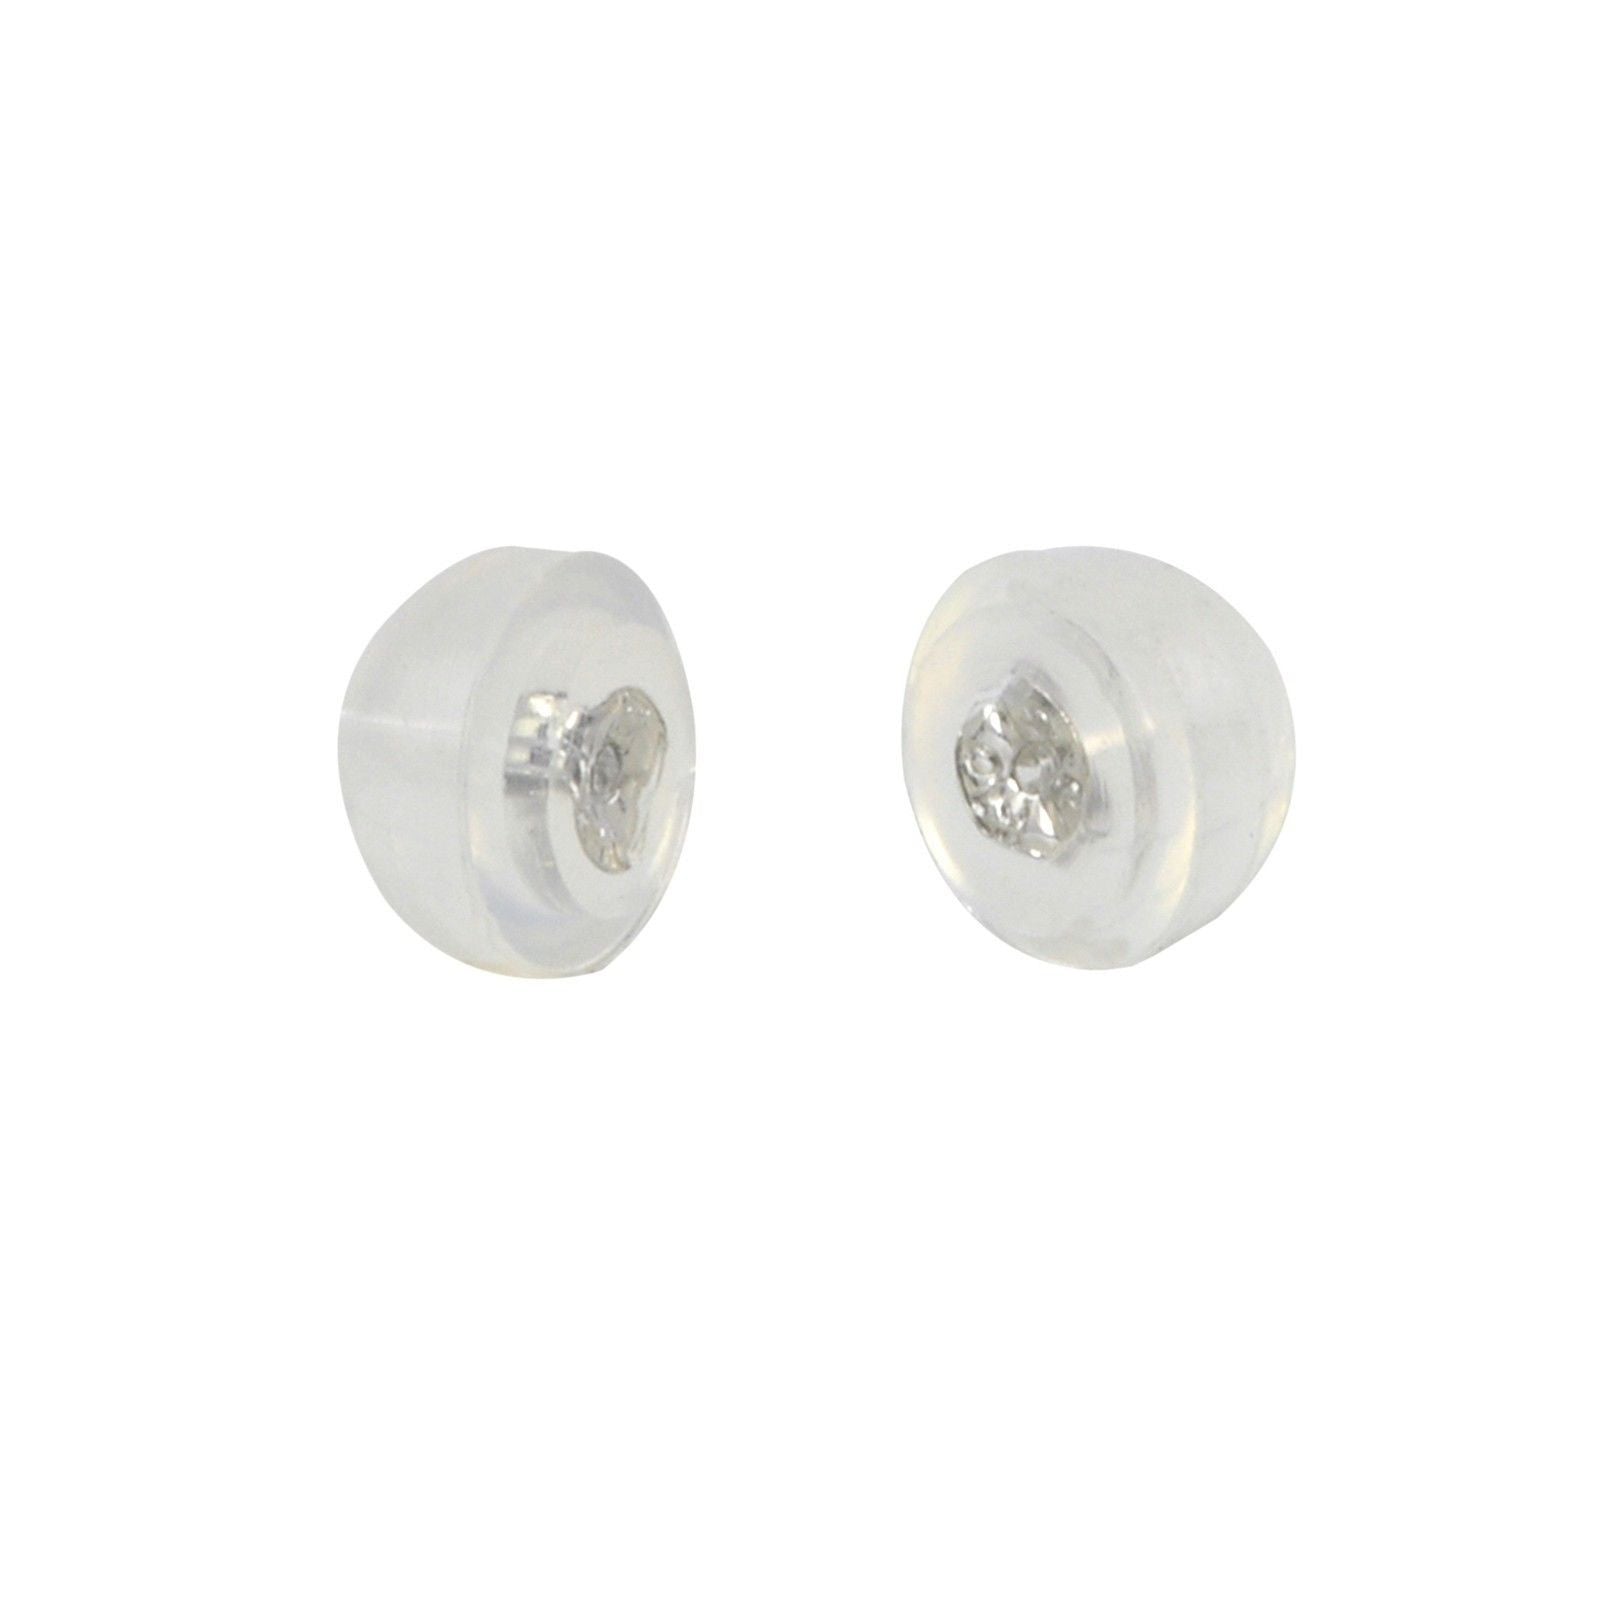 Silicone Earring Backs Clutches 10k White Gold Inserts Screw back